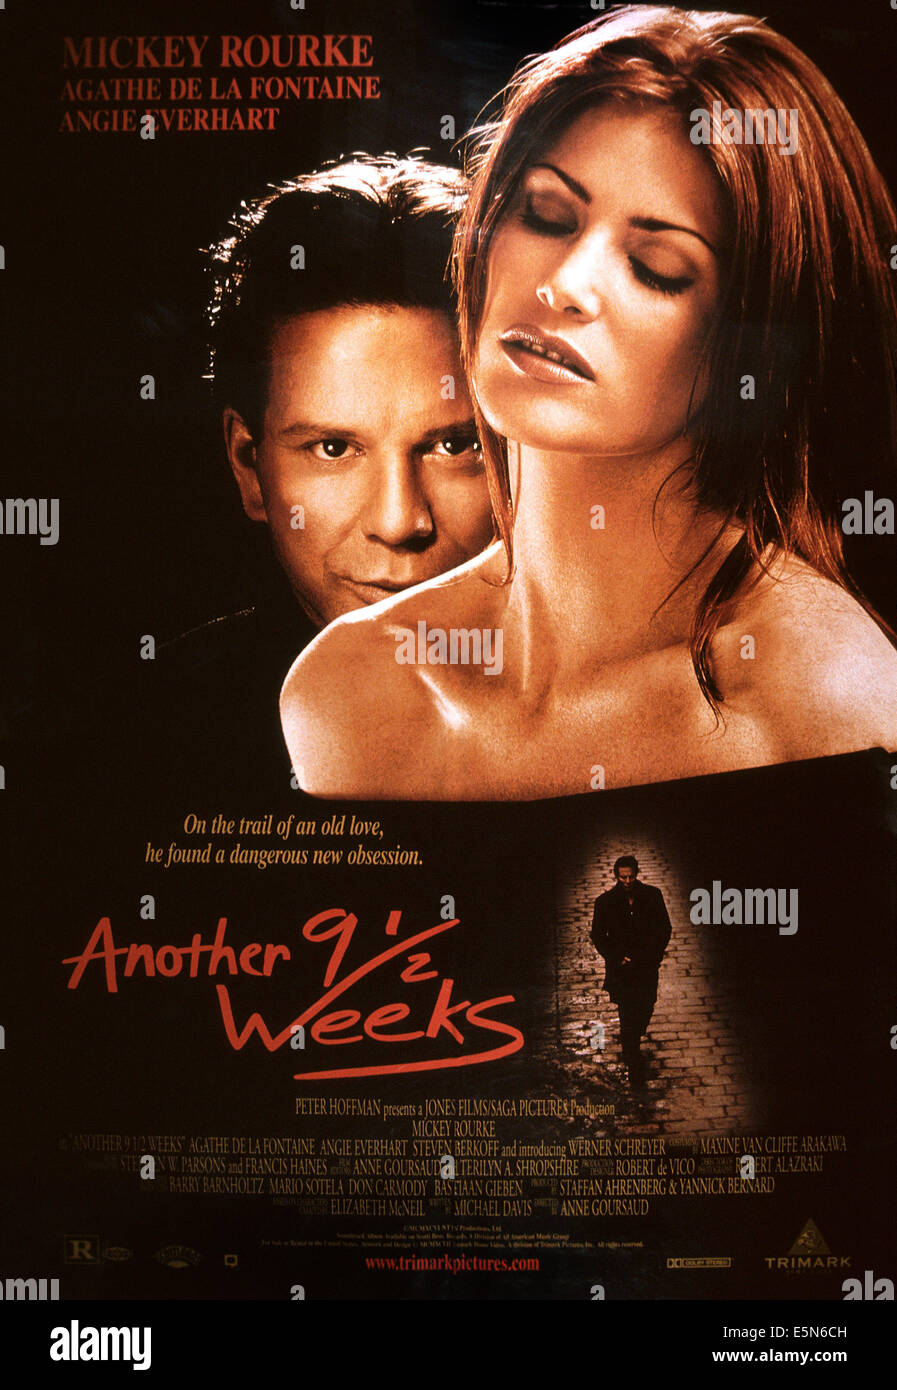 ANOTHER NINE & A HALF WEEKS, (aka ANOTHER 9 1/2 WEEKS), from left: Mickey Rourke, Angie Everhart, 1997, © Trimark/courtesy Stock Photo